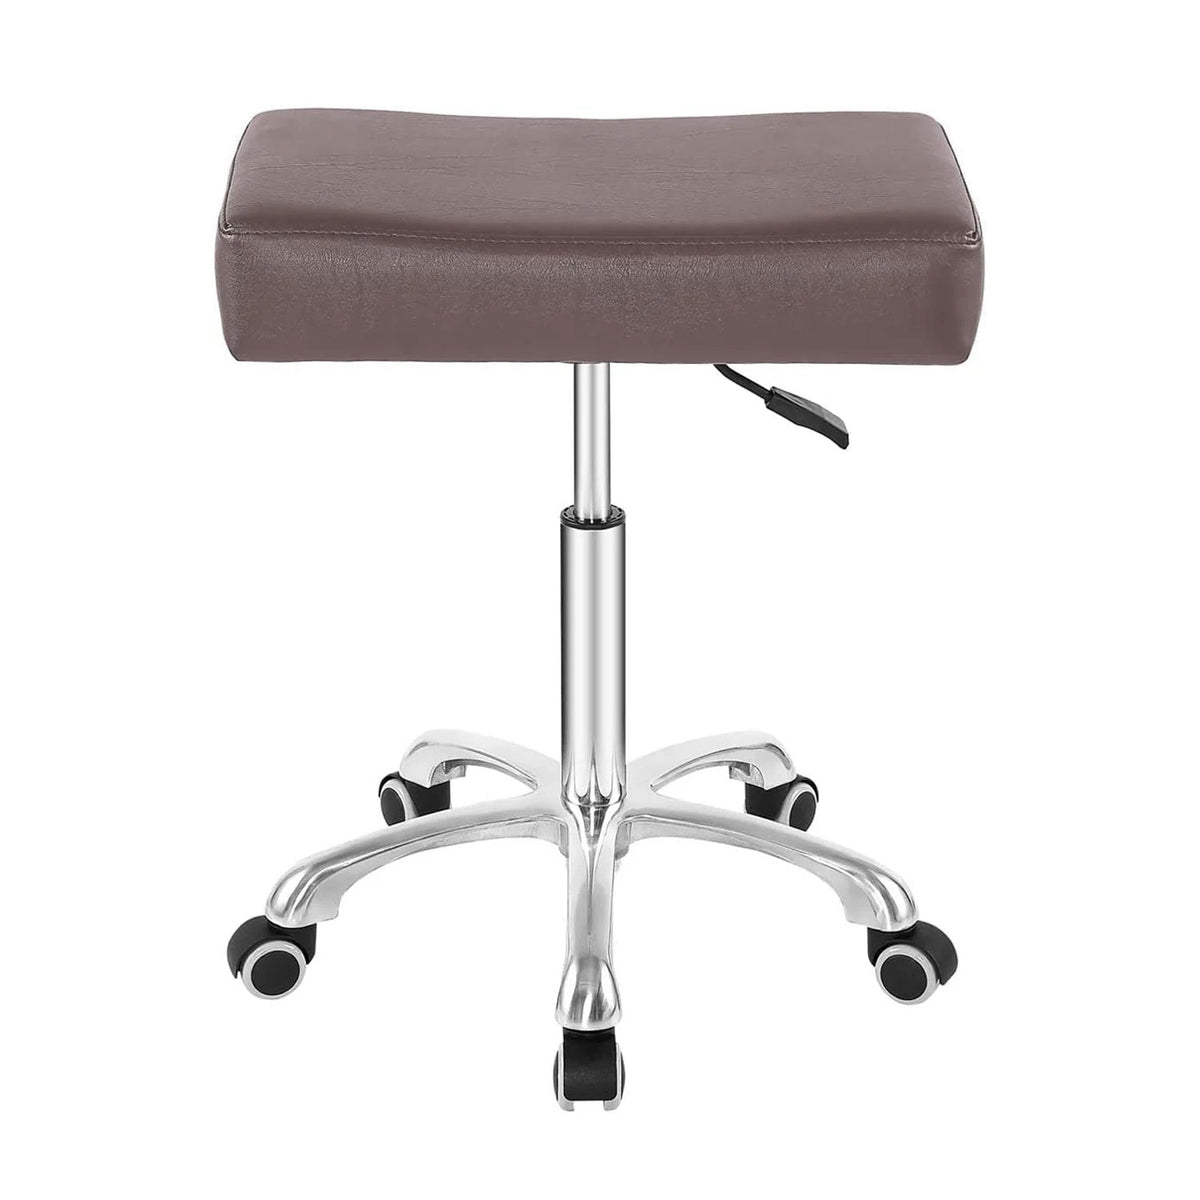 SmileSellers Rolling Swivel Stool Height Adjustable with Wheels Heavy Duty for Office Home Desk Counter Salon